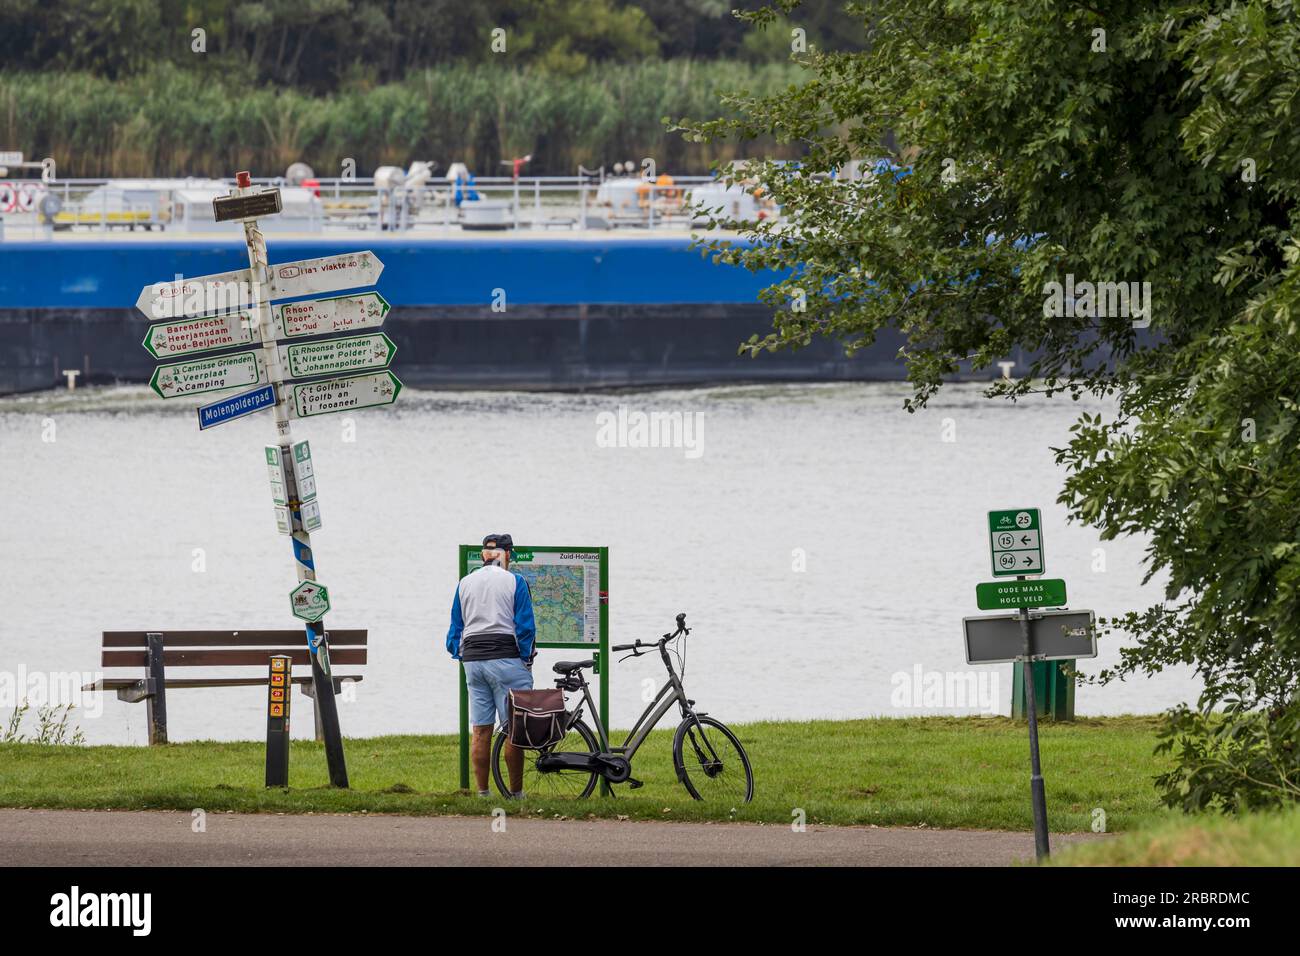 Barendrecht, the Netherlands - 2021-09-02: An elderly man checking the route for his cycling trip along the river Stock Photo